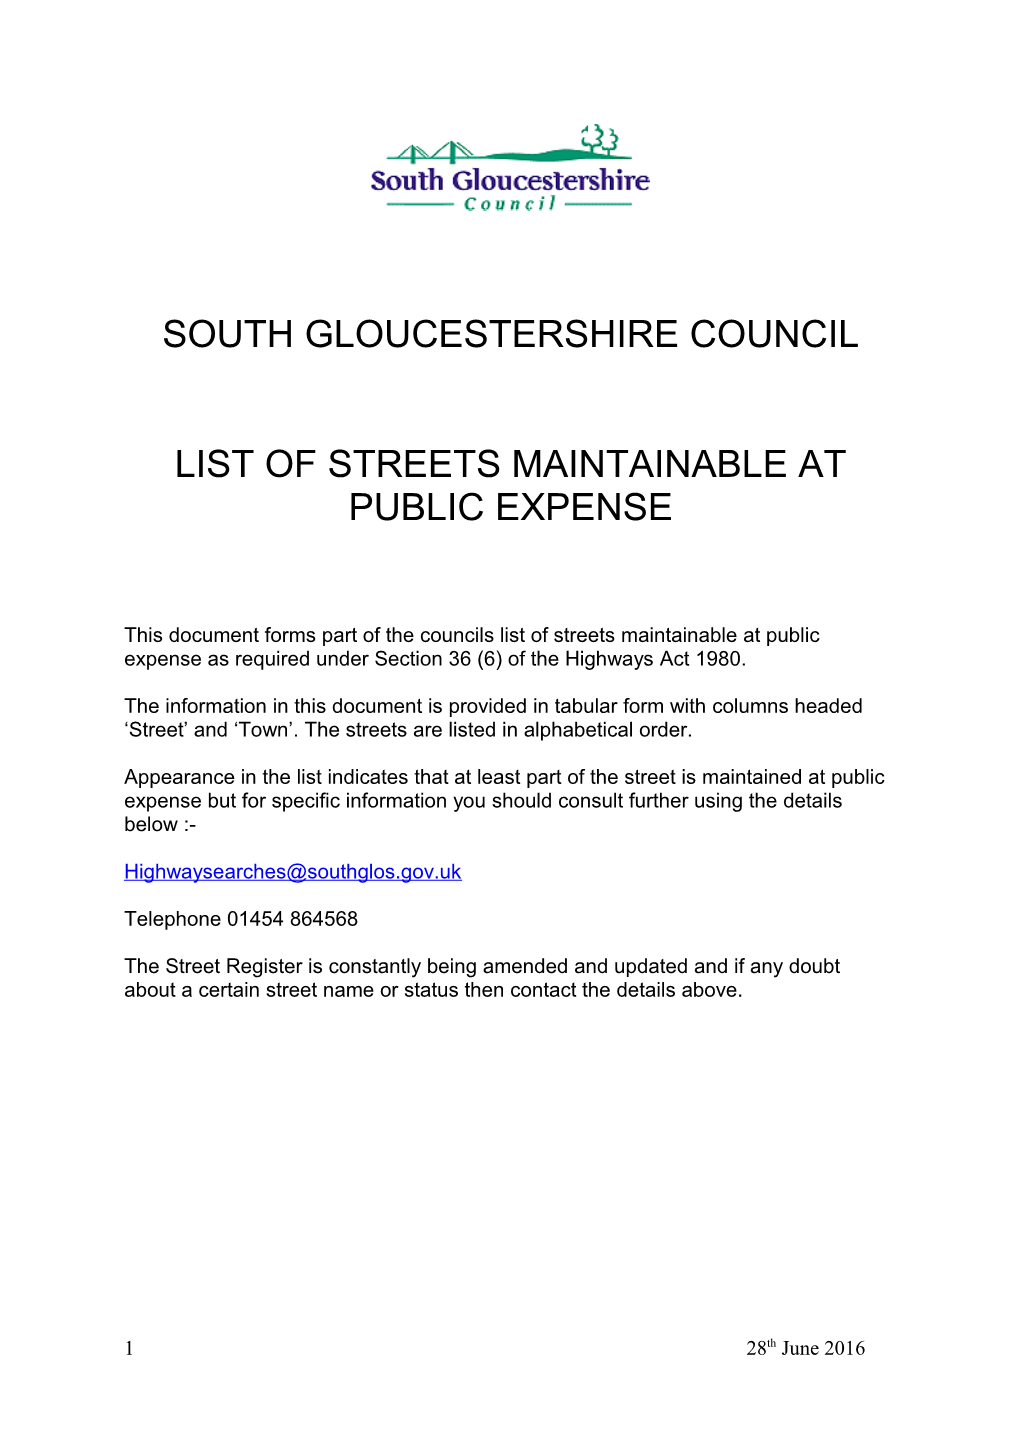 List of Streets Maintainable at Public Expense